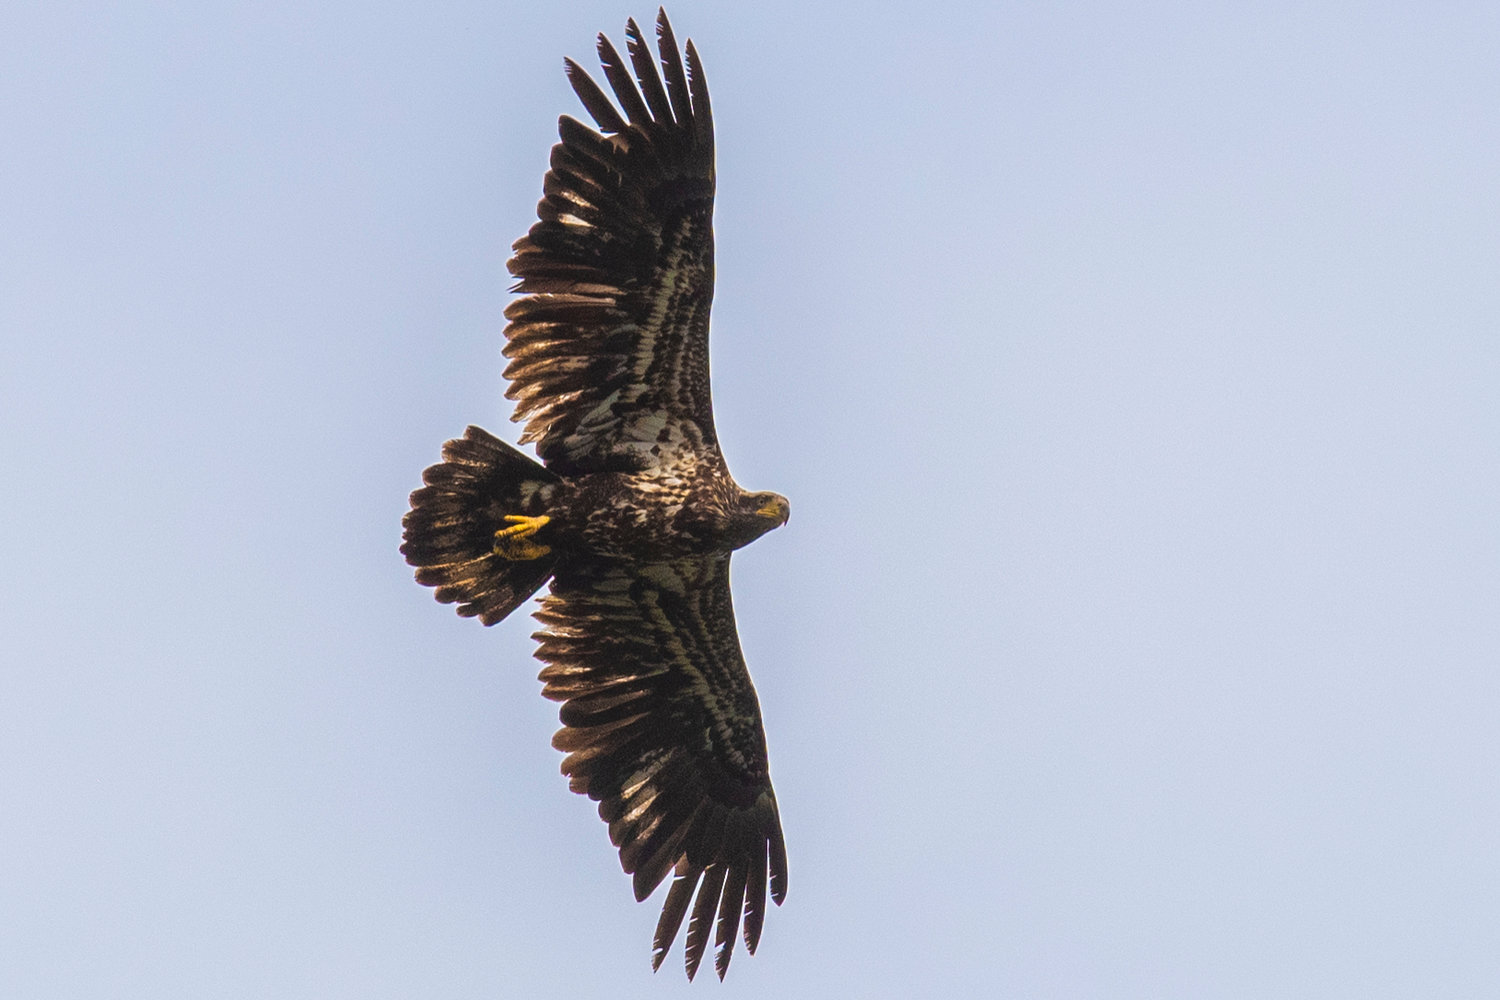 A young bald eagle flies above Fort Borst Park in Centralia on Wednesday afternoon.